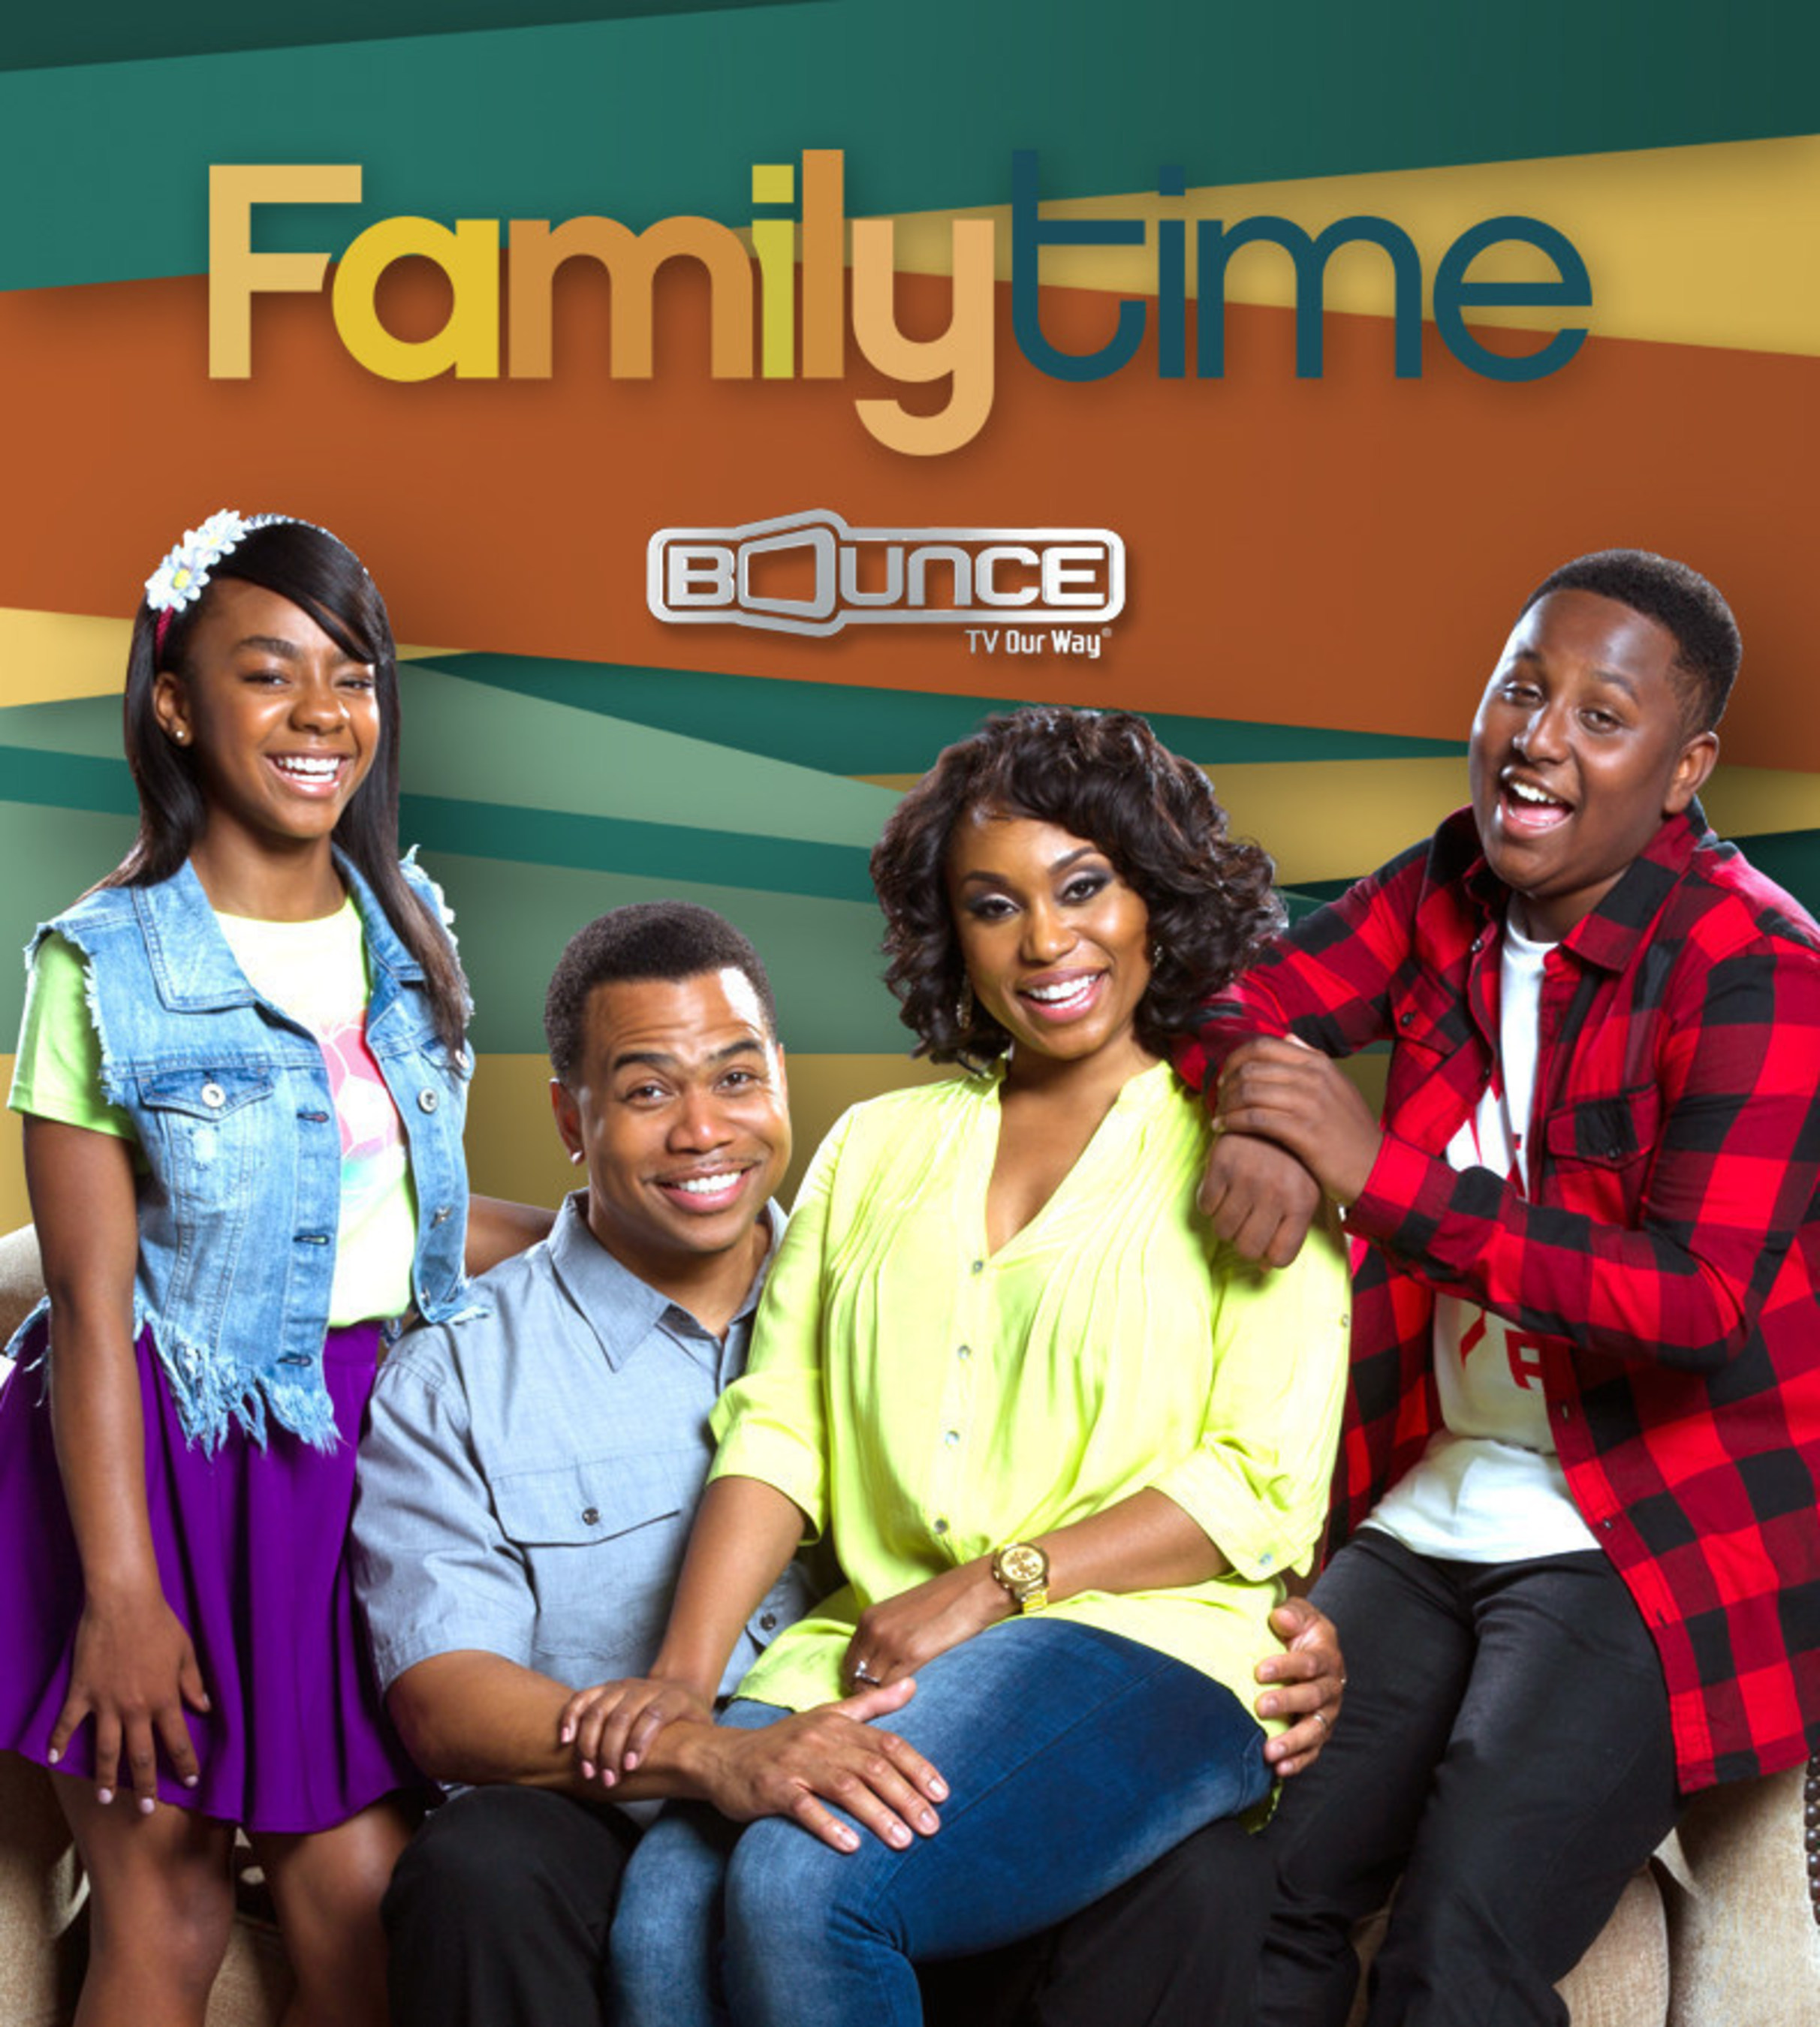 New episodes of the hit sitcom Family Time premiere Tuesday nights at 9:00 pm (ET) on Bounce TV, the nation's first-and-only over-the-air and free television network for African Americans. For more information, visit BounceTV.com